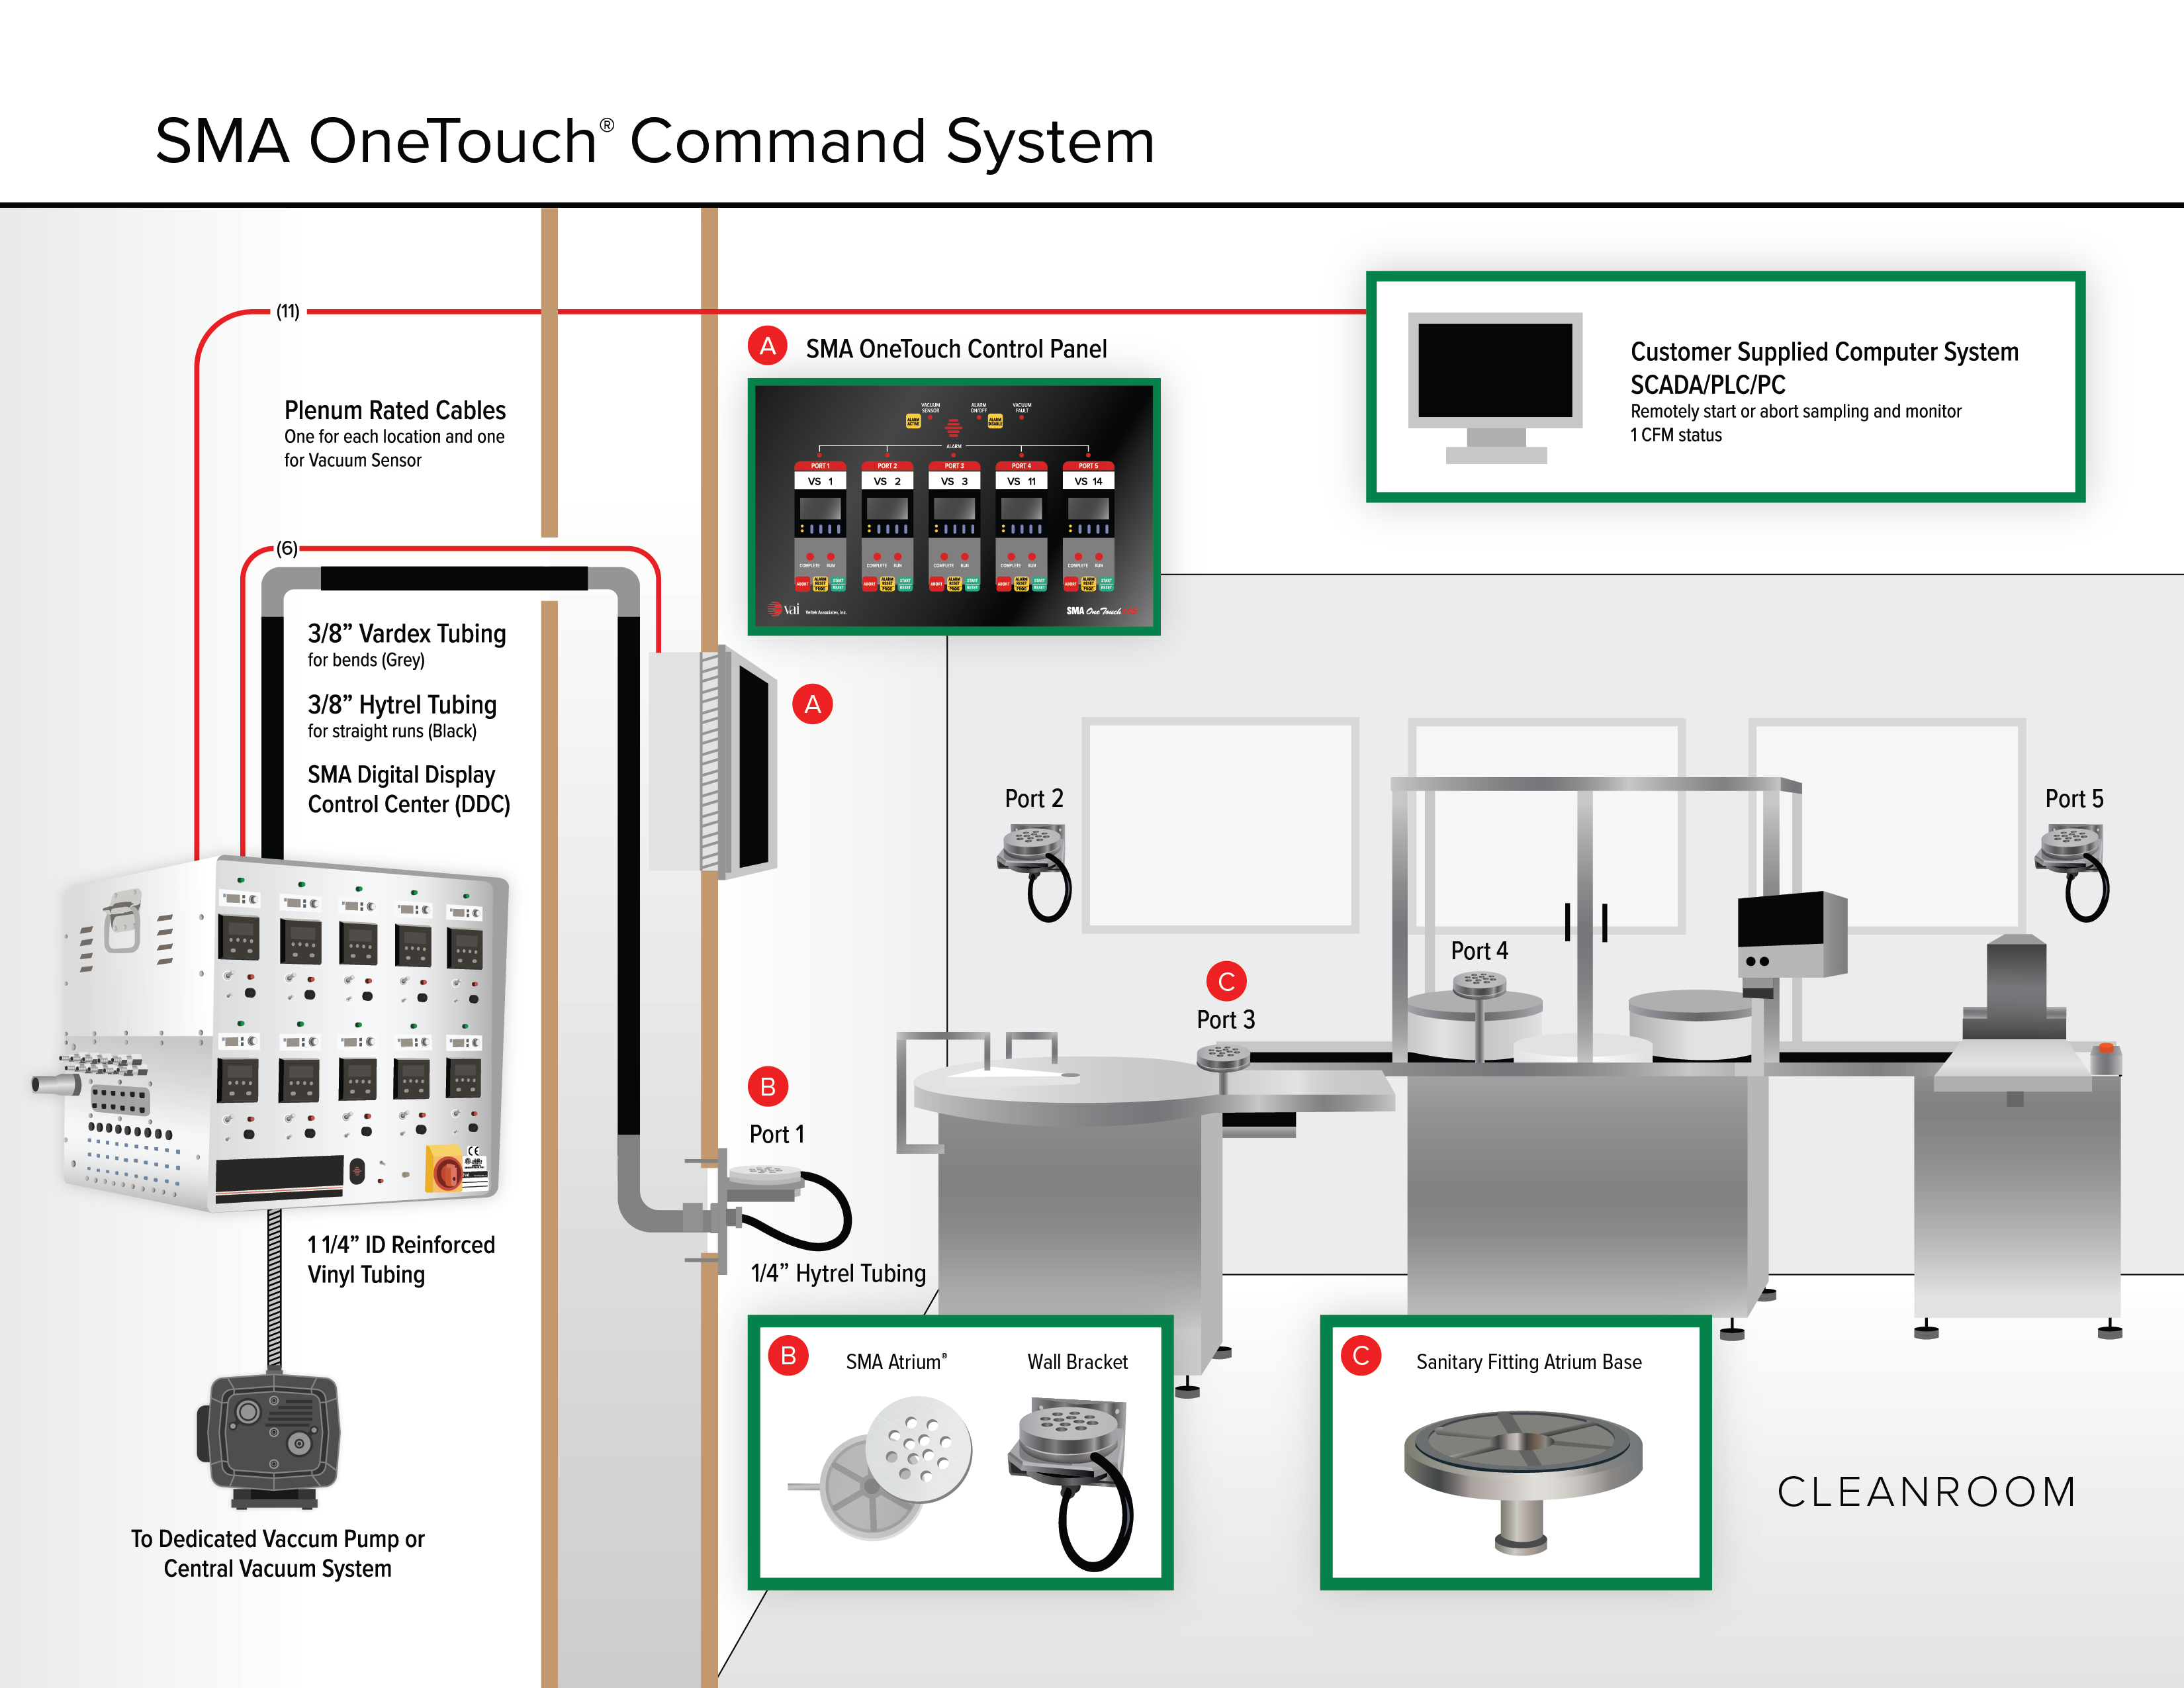 SMA OneTouch Command System